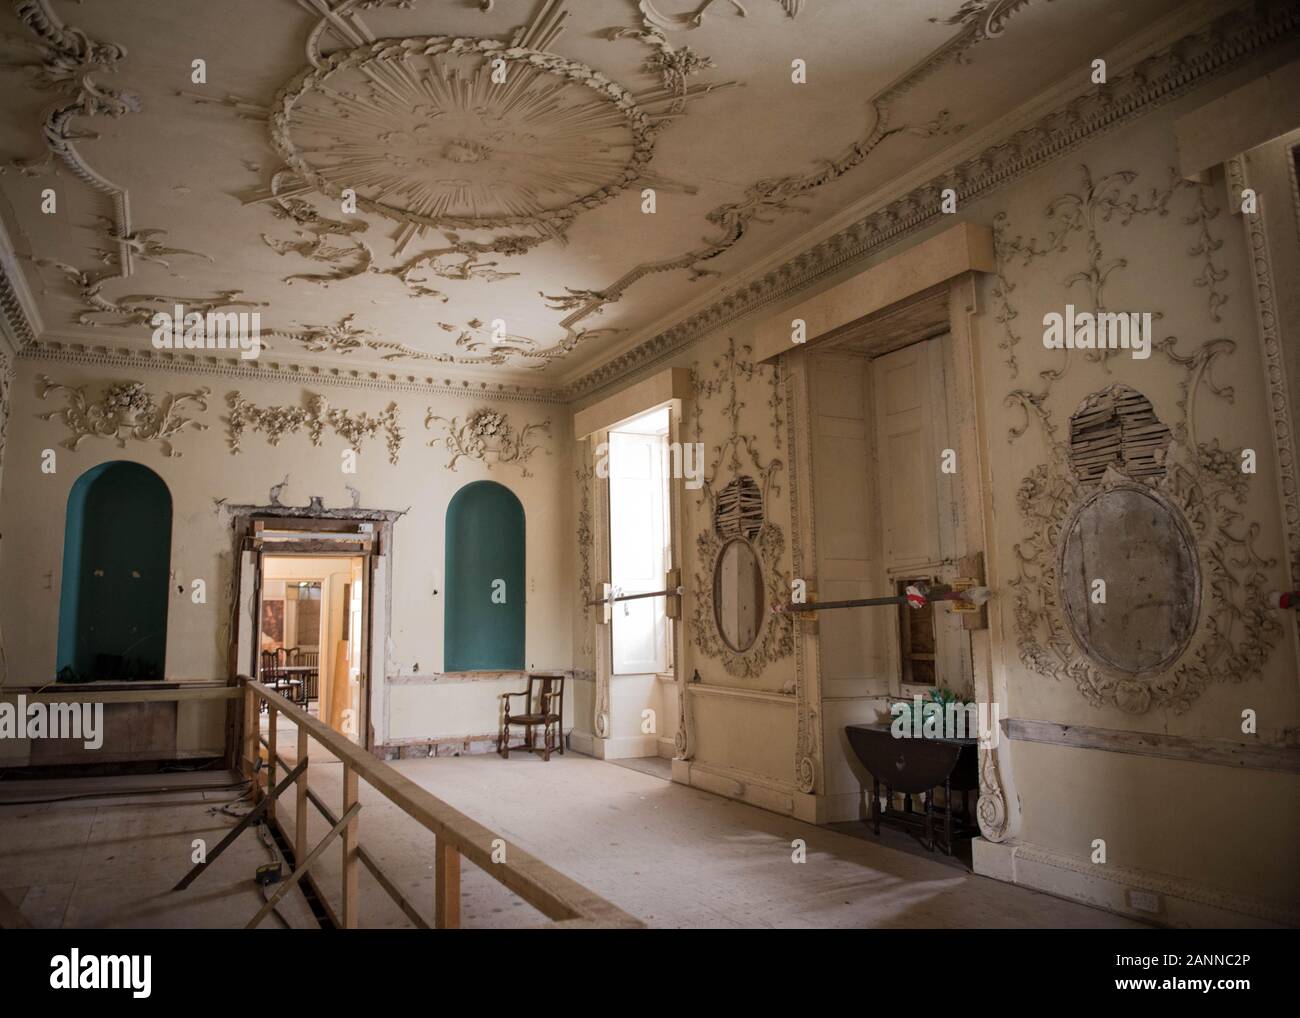 Interior of Poltimore House near Exeter in Devon UK. Currently undergoing attempted renovation but in disrepair and various stages of decline. Stock Photo